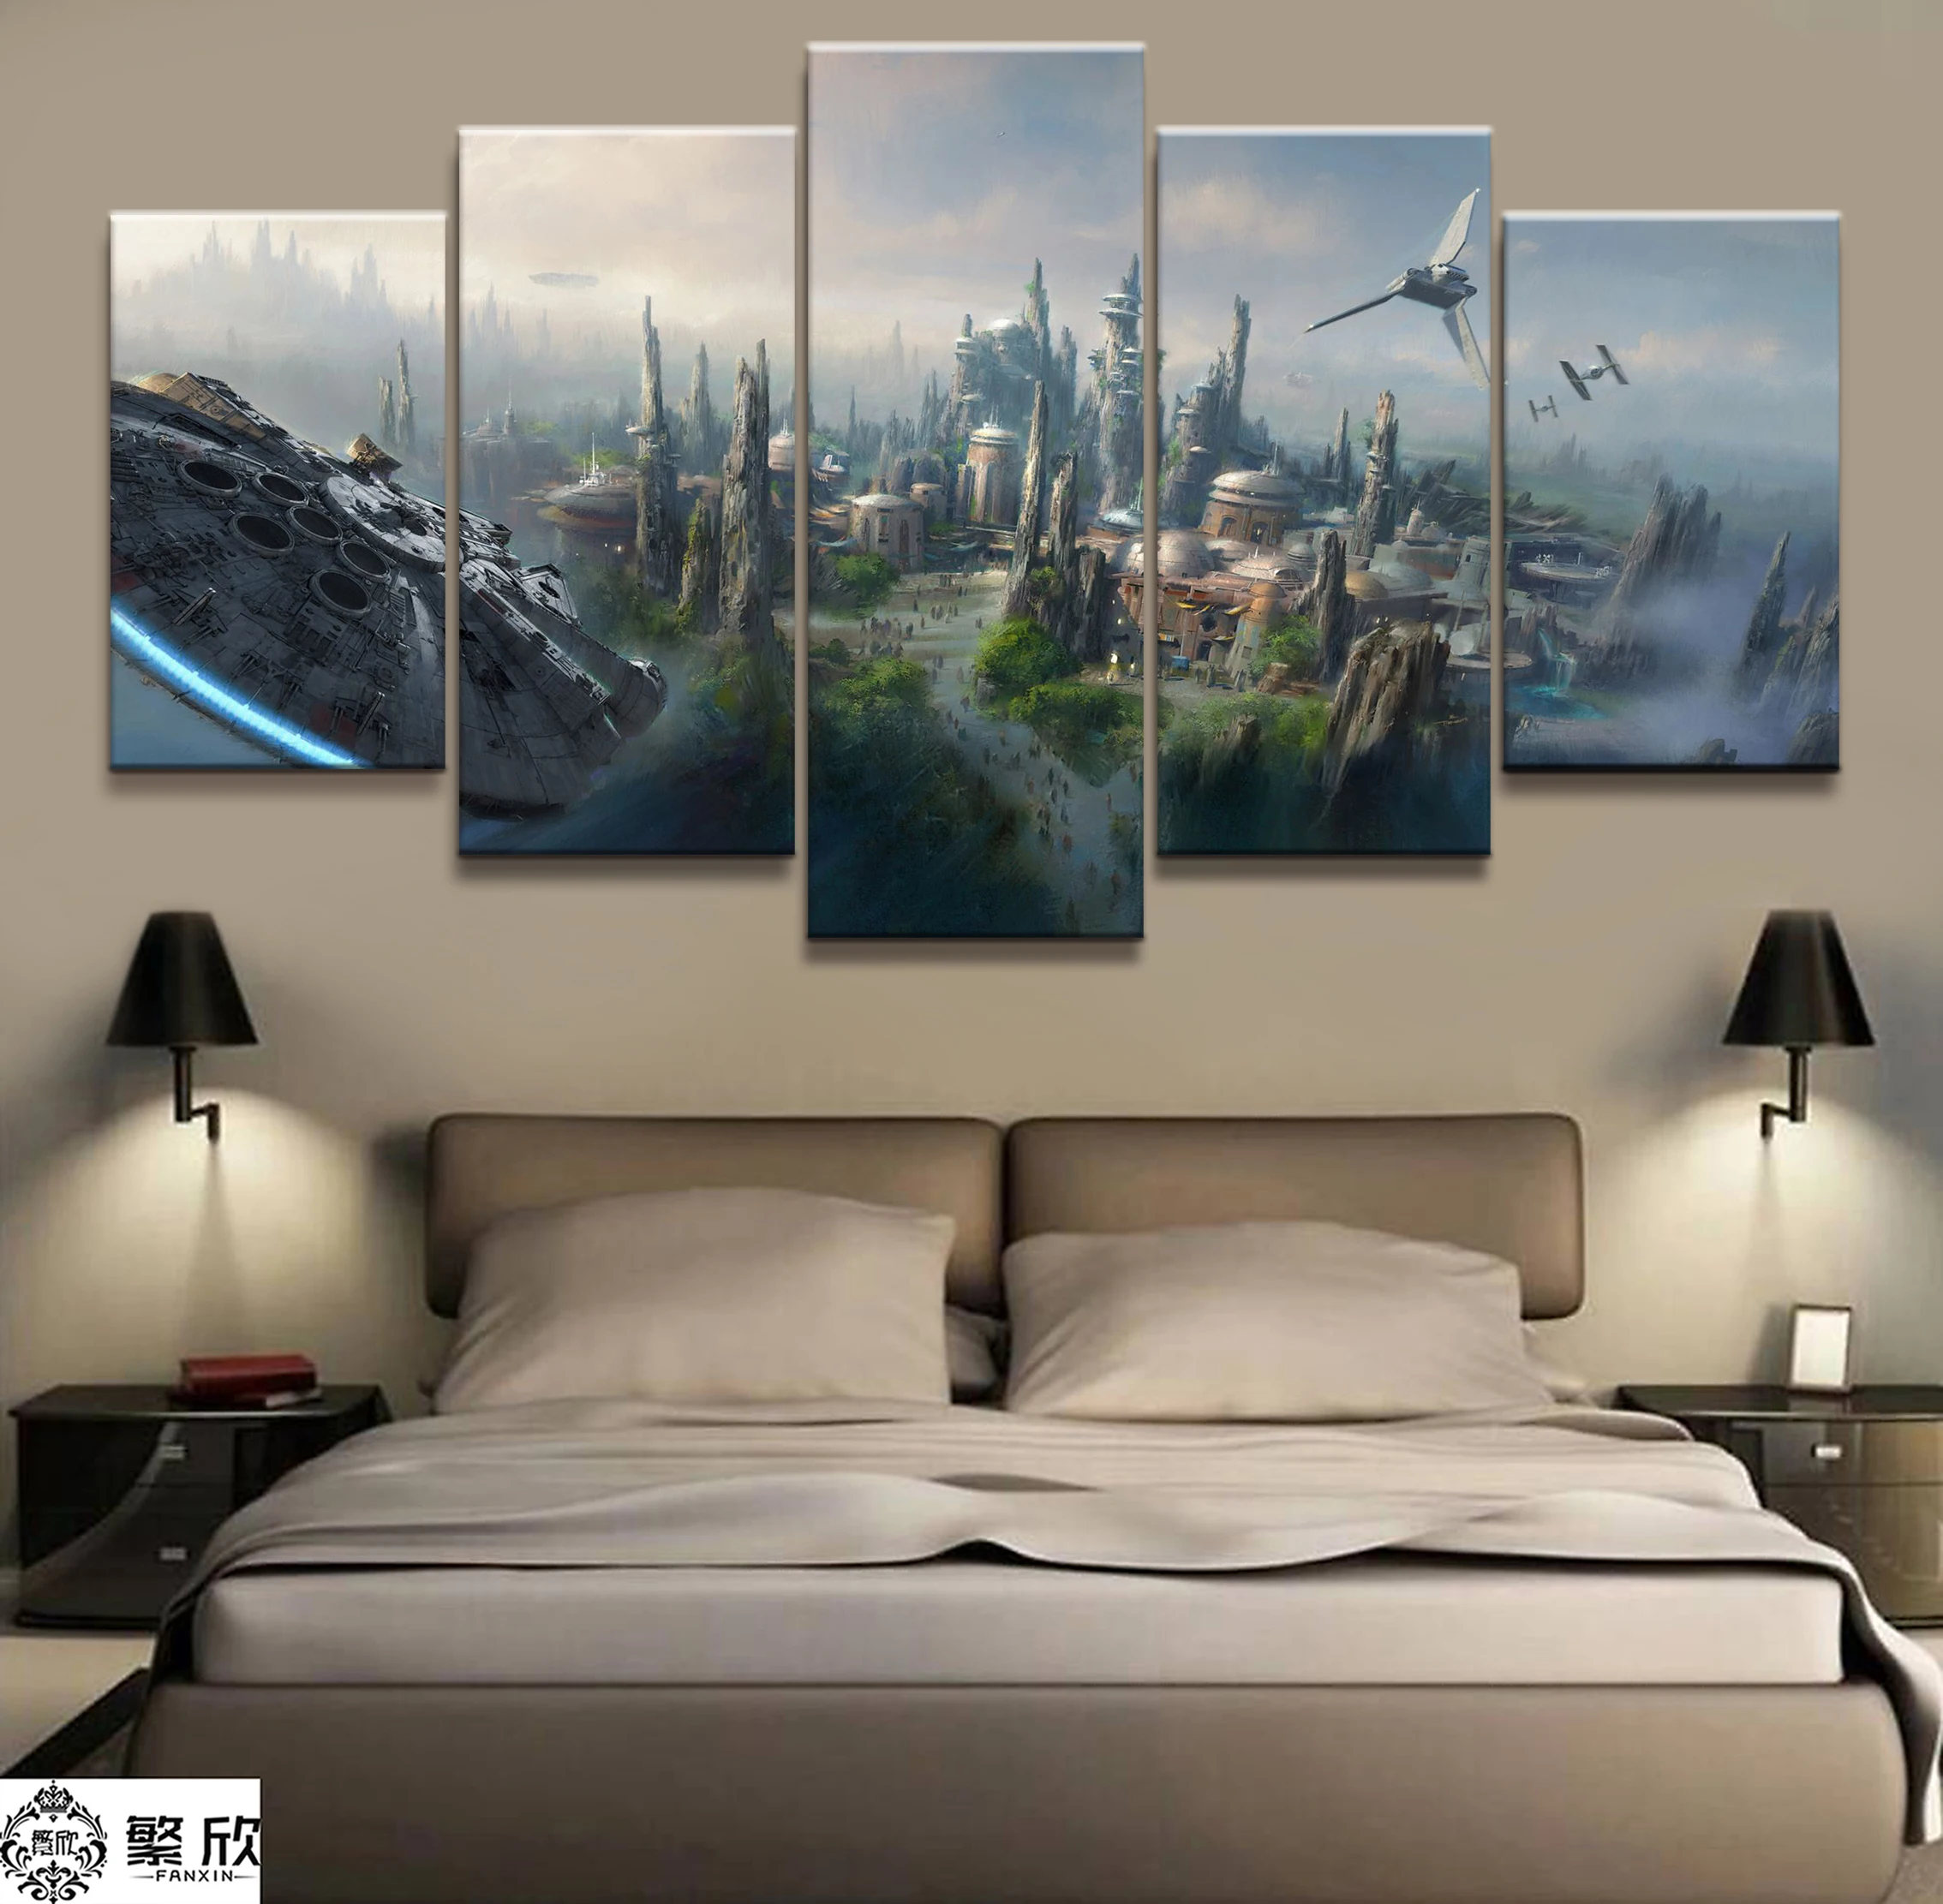 

5 Pieces Painting Star War Movie Poster Modern Home Decor For Living Room Wall Canvas Print Pictures Painting Canvas Wholesale